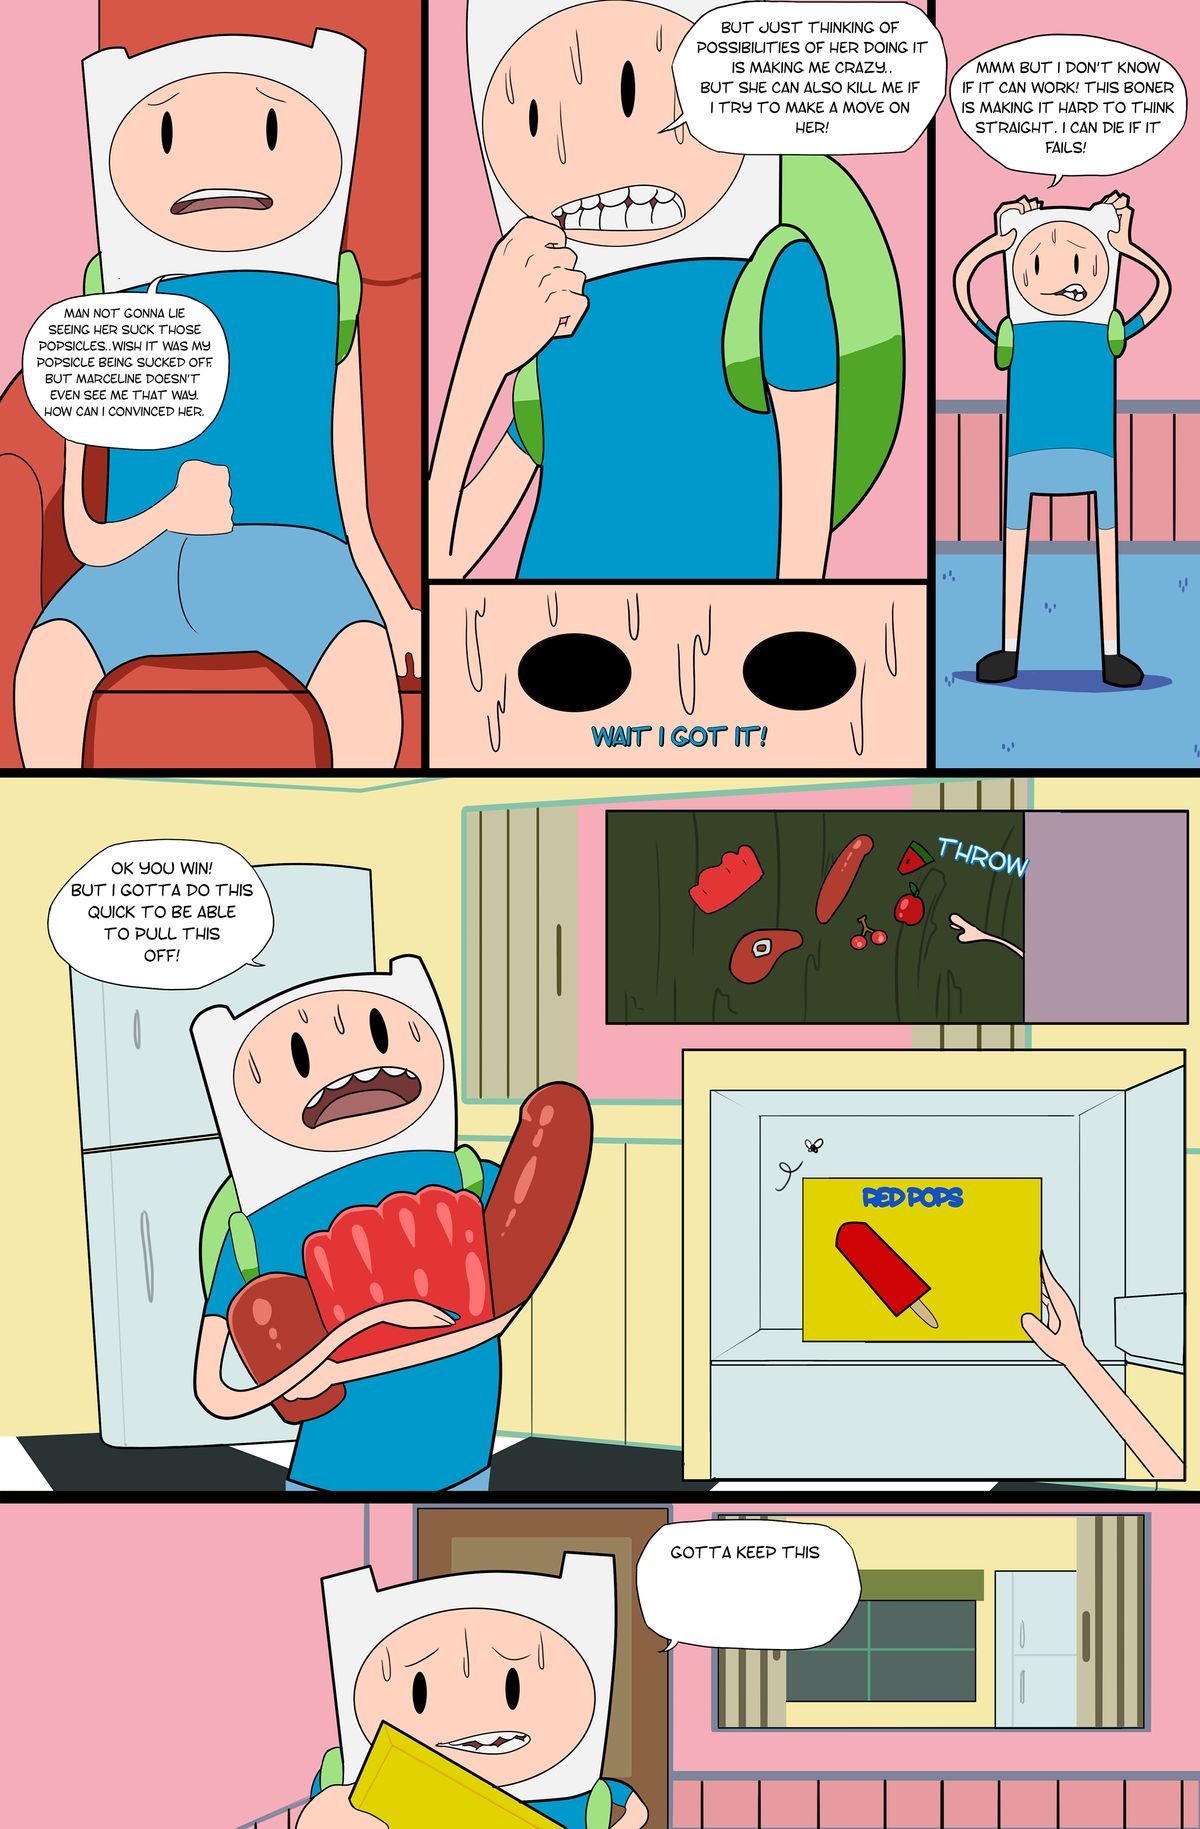 [Dipdoodle]_Adventure_Time_-_Desire_For_the_Color_Lust comix_59905.jpg